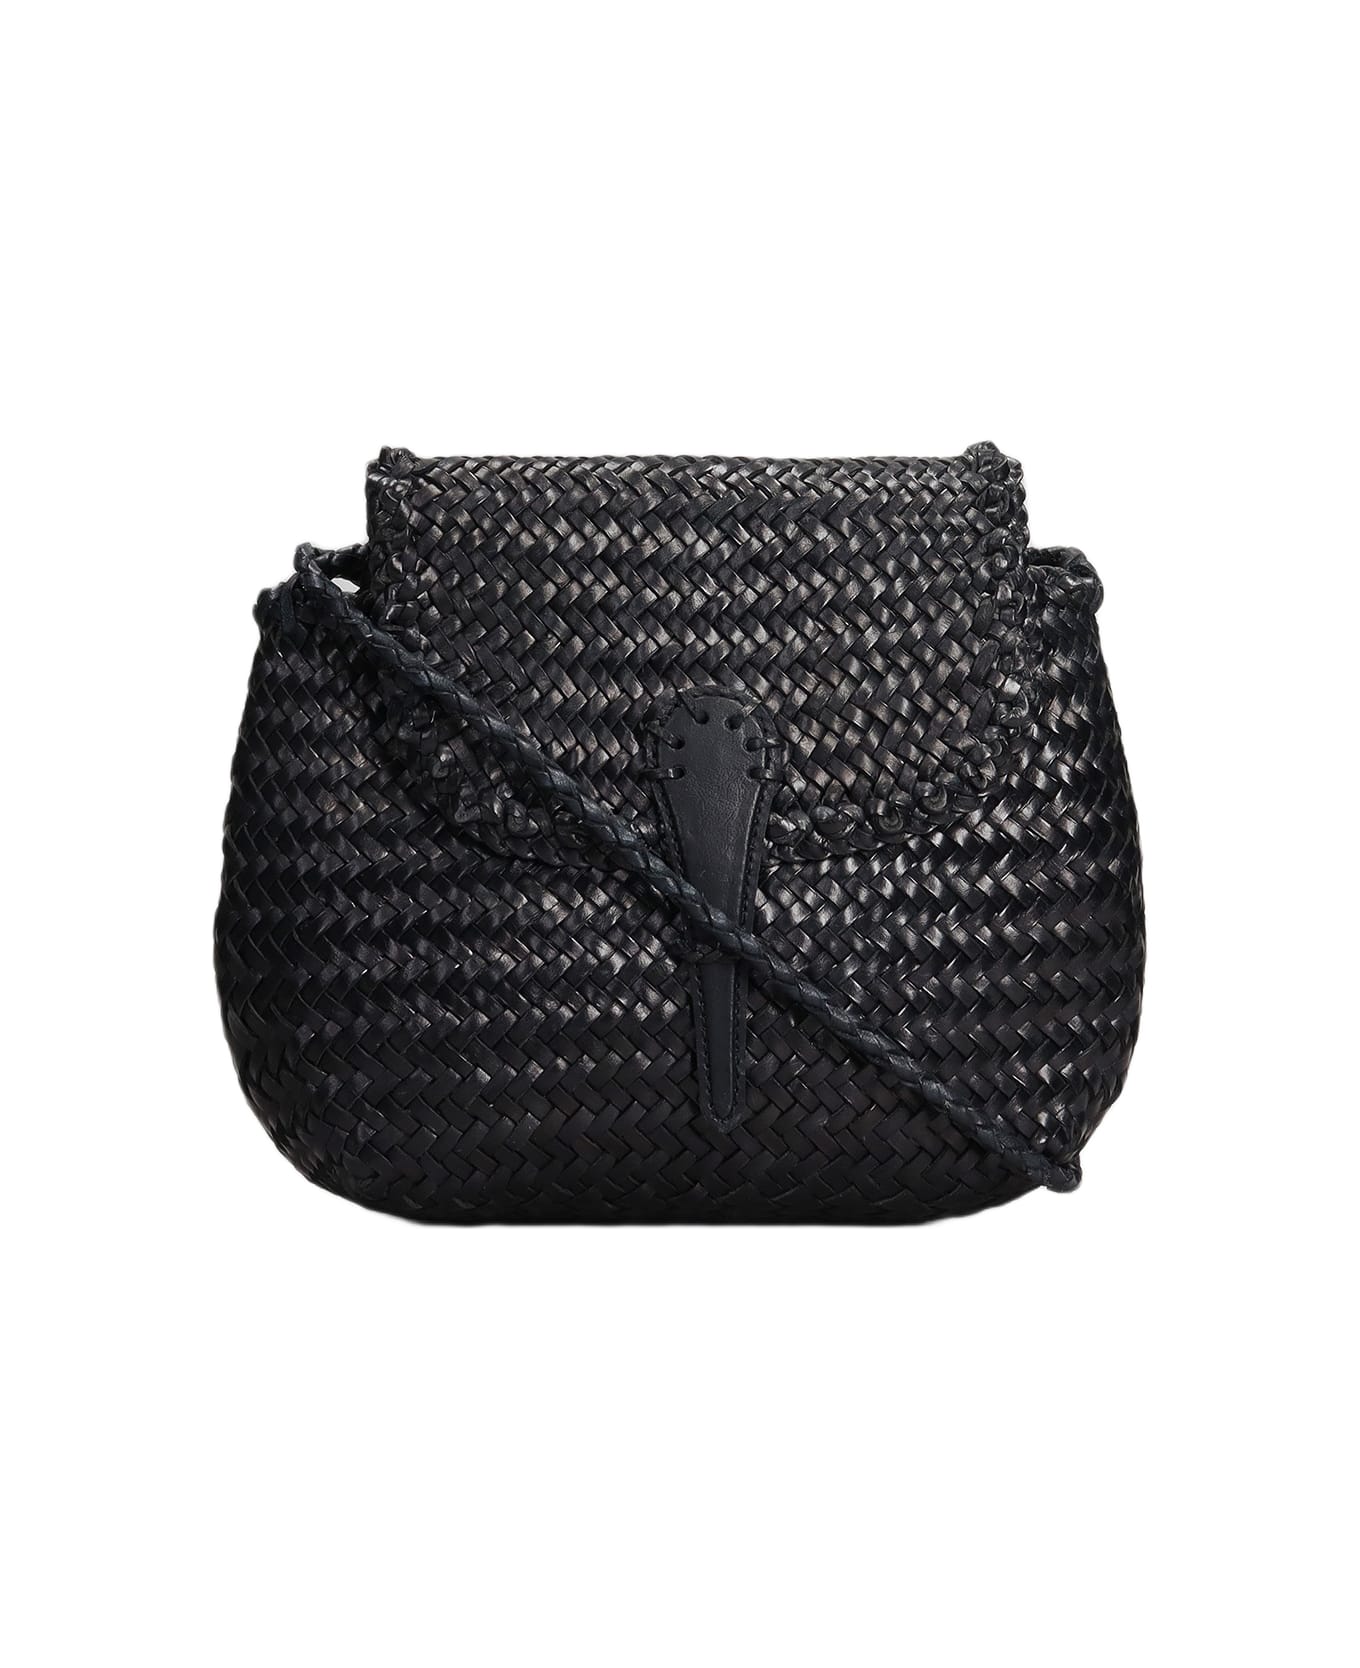 Dragon Diffusion Minsu Shoulder Bag In Leather Color Leather - leather color